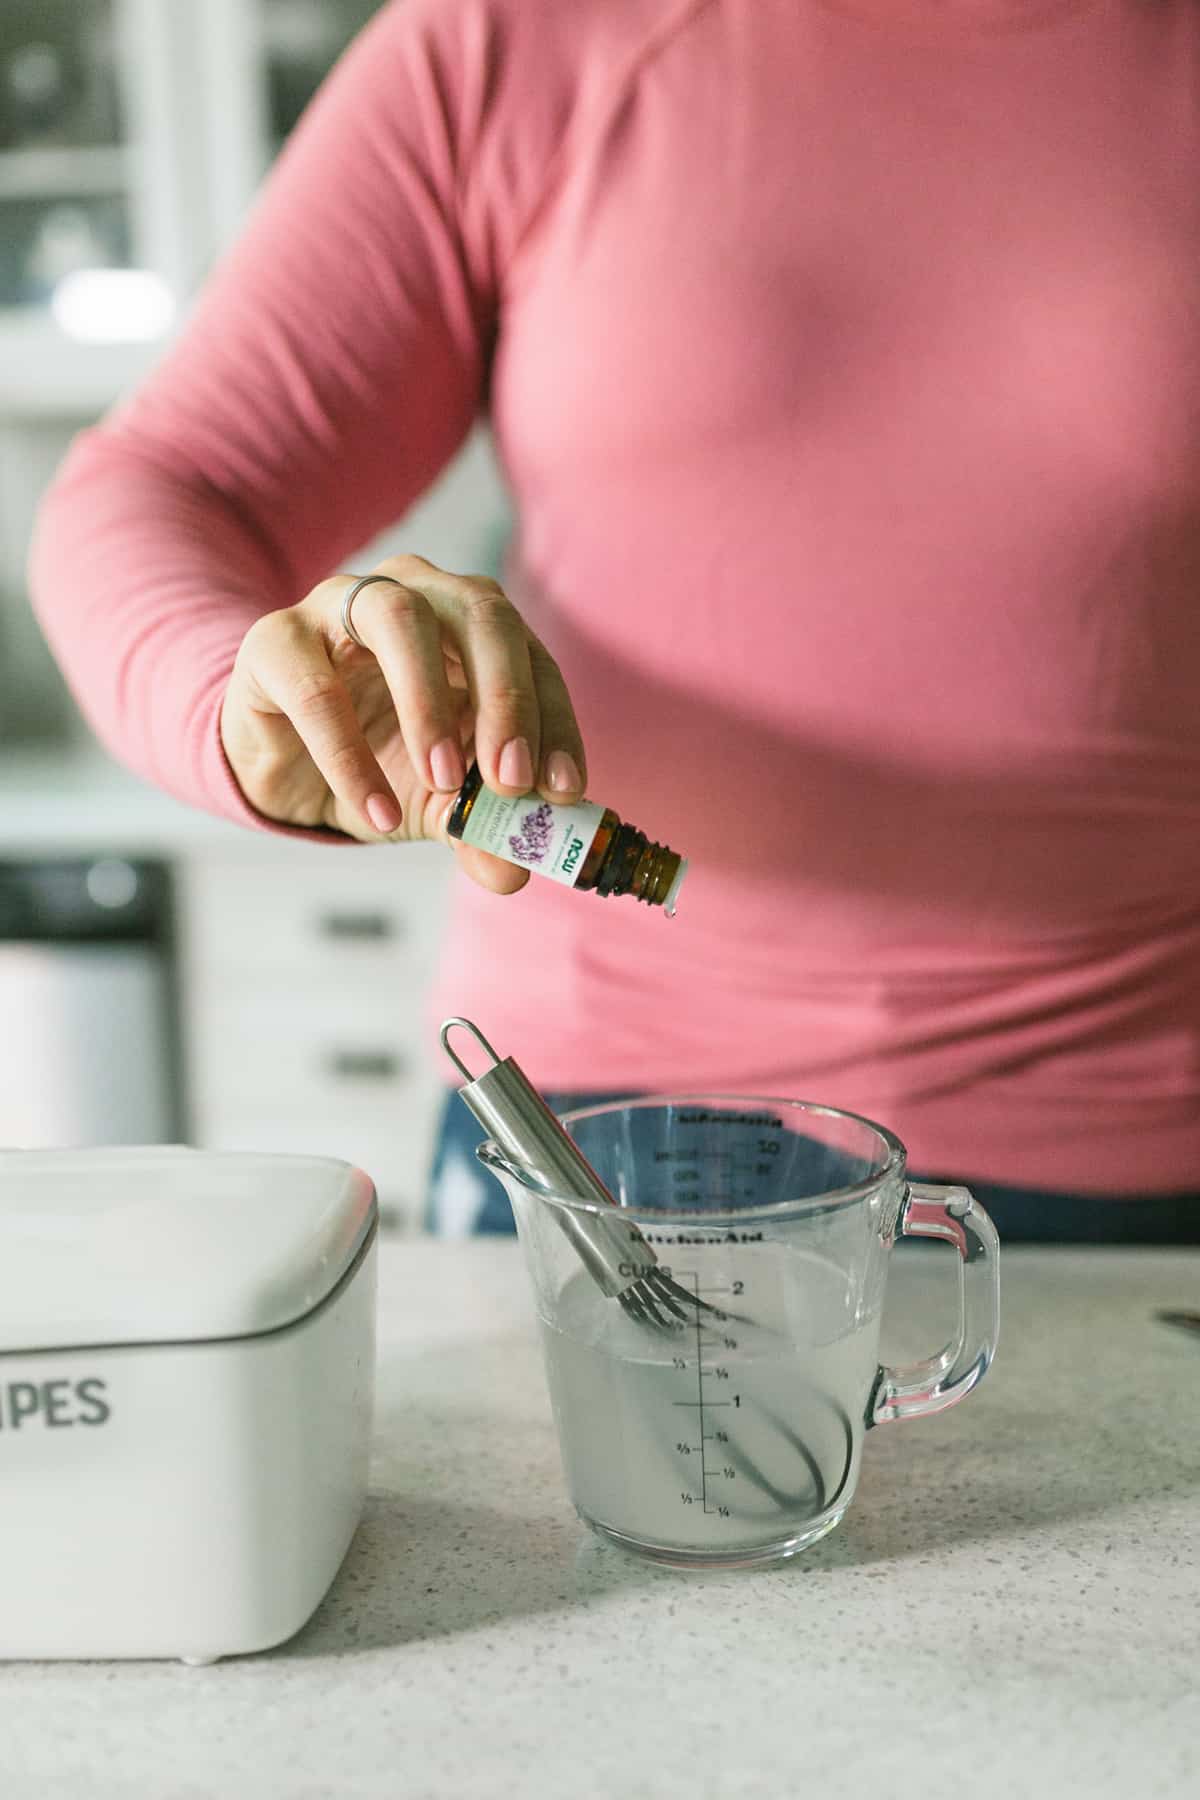 Woman in a pink shirt pouring essential oils into a glass measuring cup that has a whisk sitting in it.